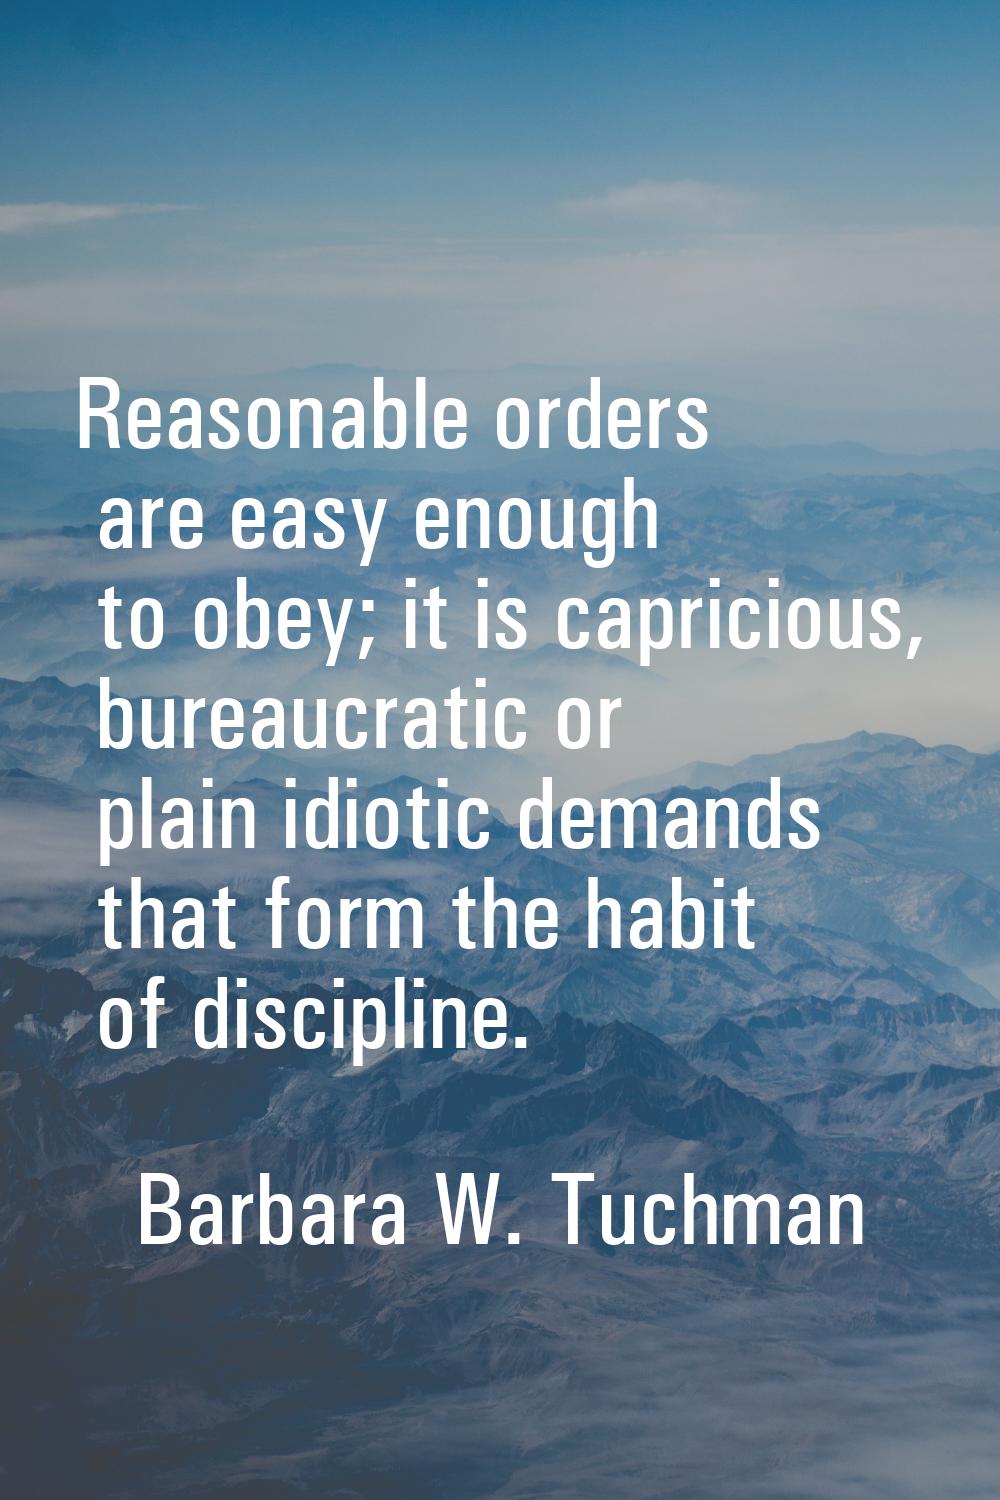 Reasonable orders are easy enough to obey; it is capricious, bureaucratic or plain idiotic demands 